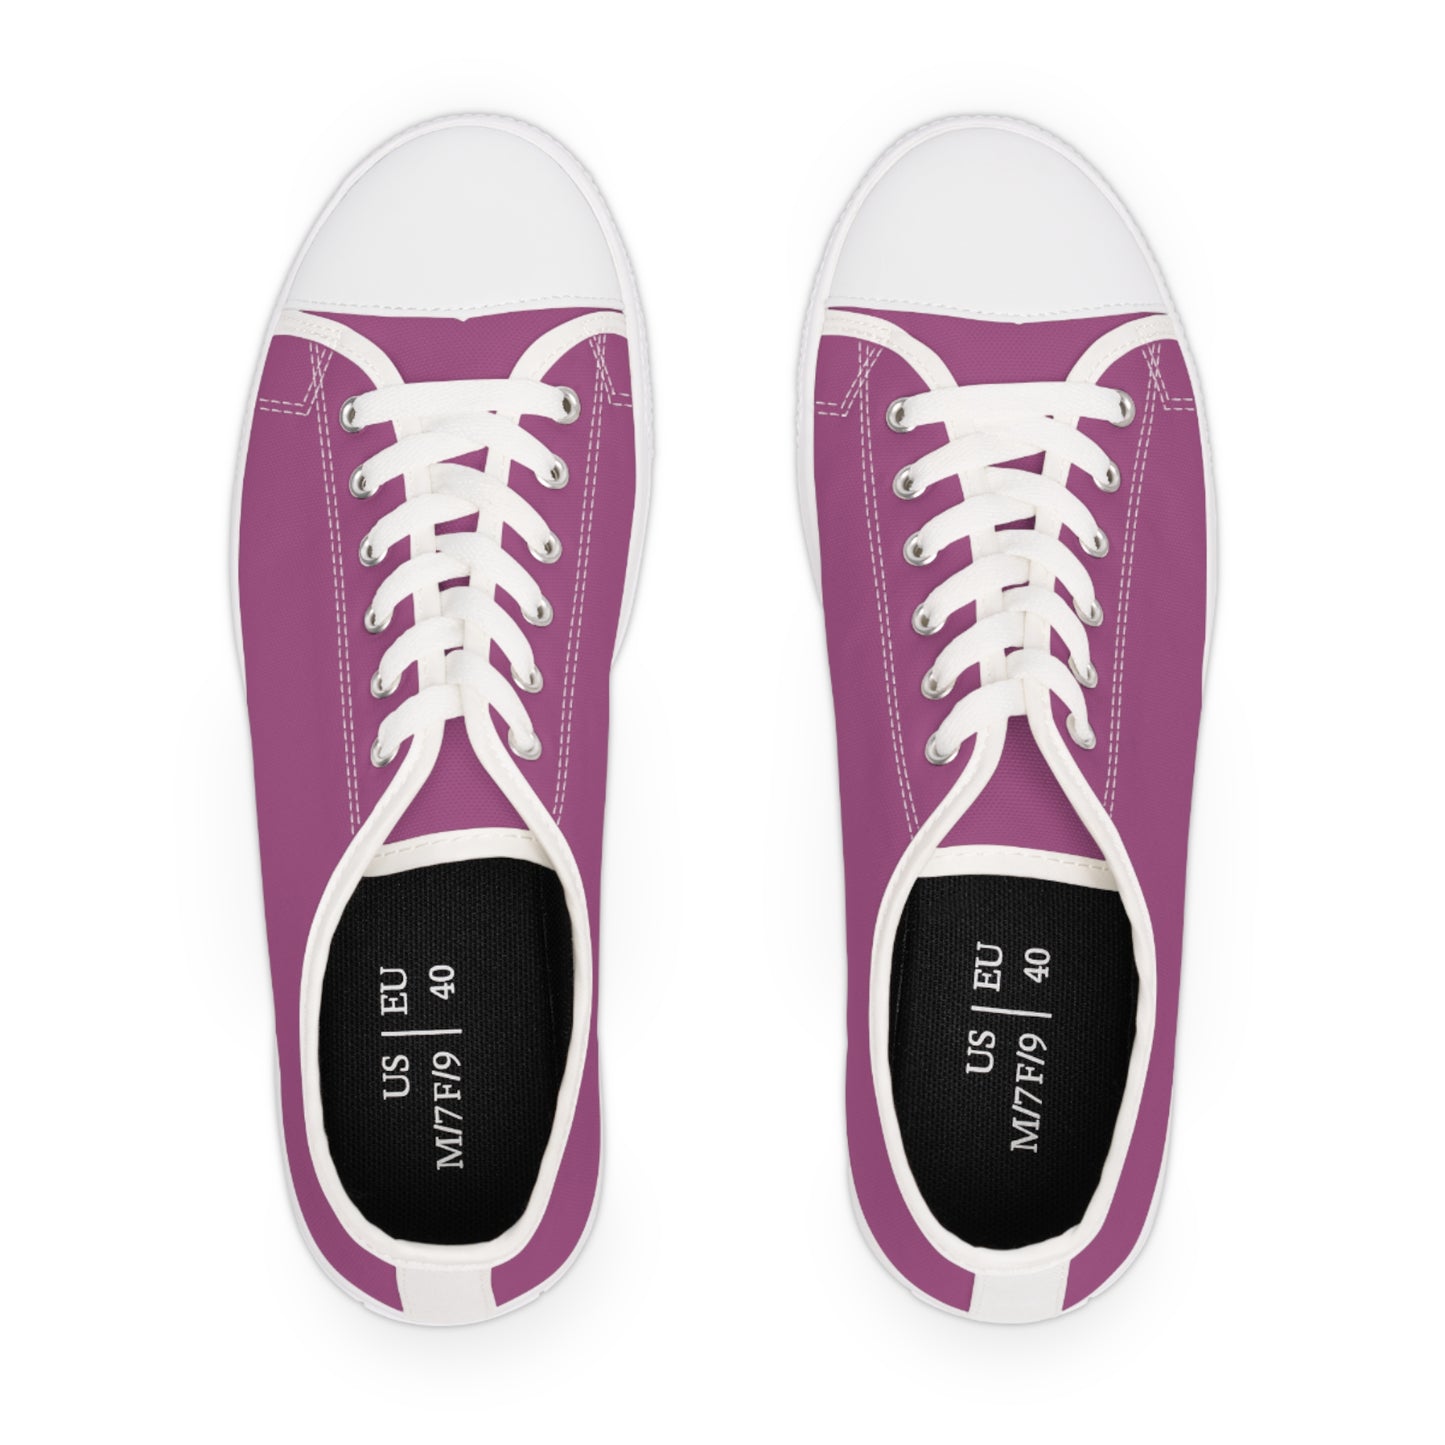 Women's Canvas Low Top Solid Color Sneakers - Candy Wrapper Pink US 12 White sole